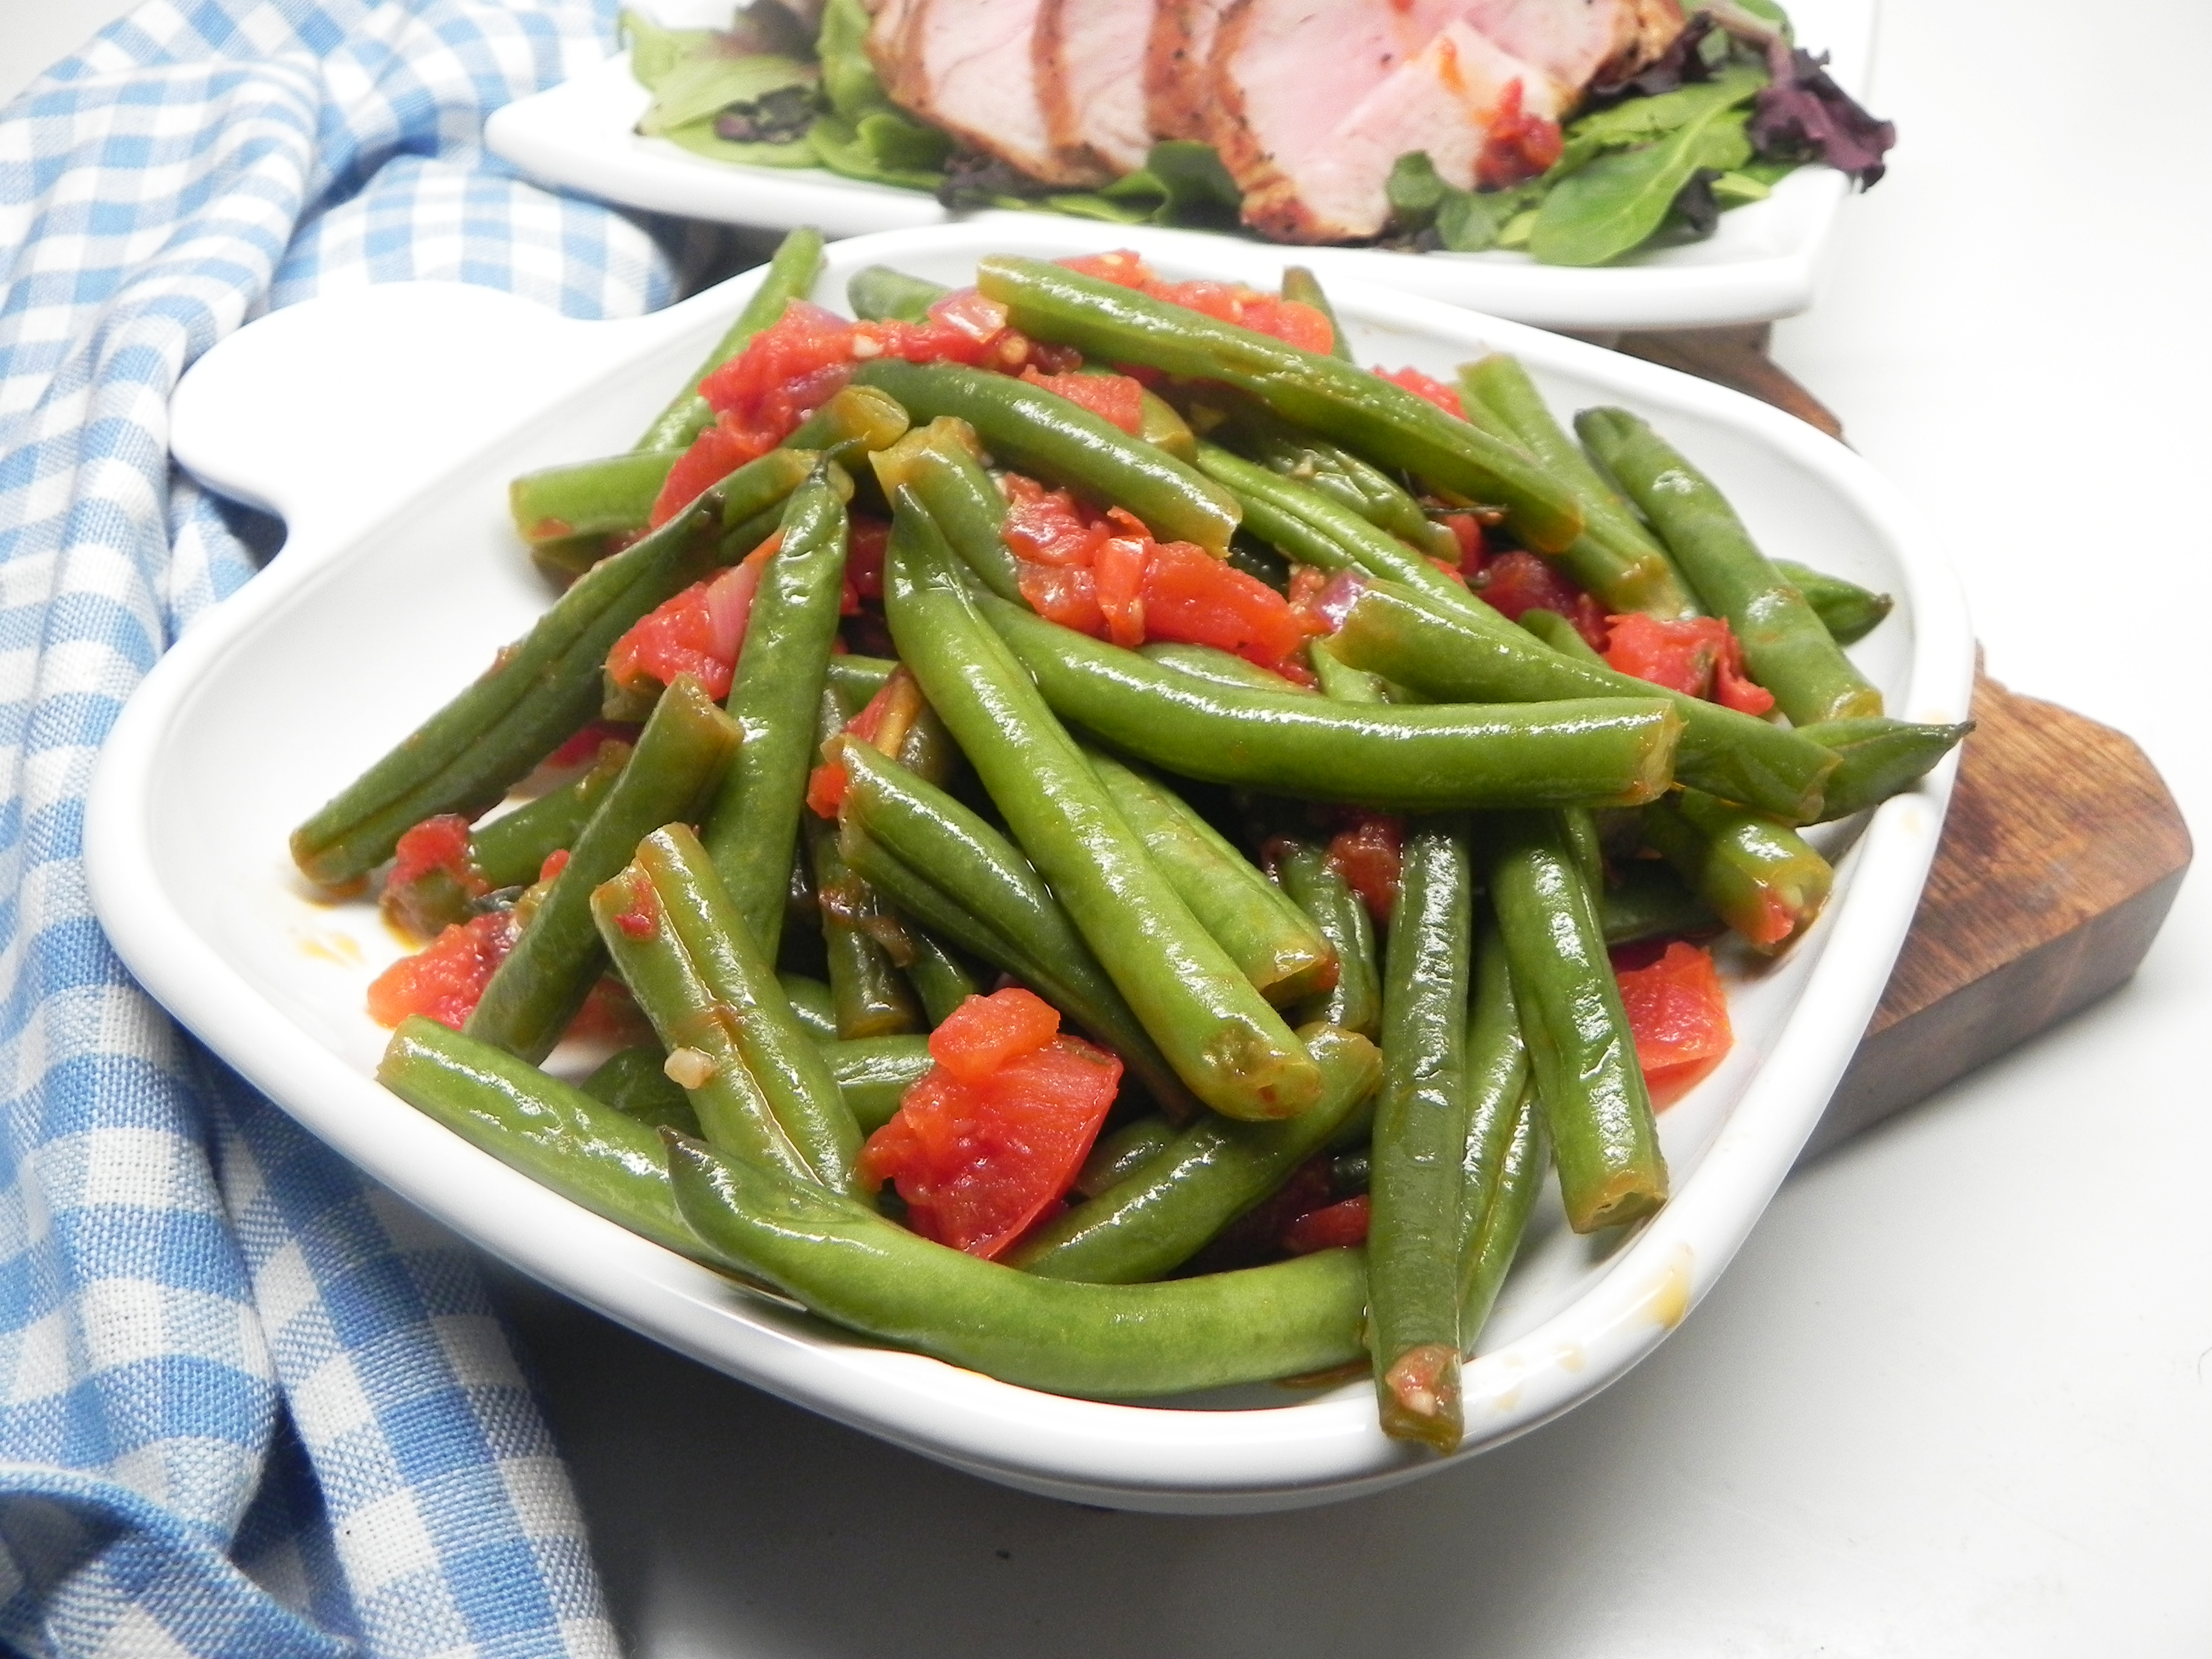 Green Beans with a Kick